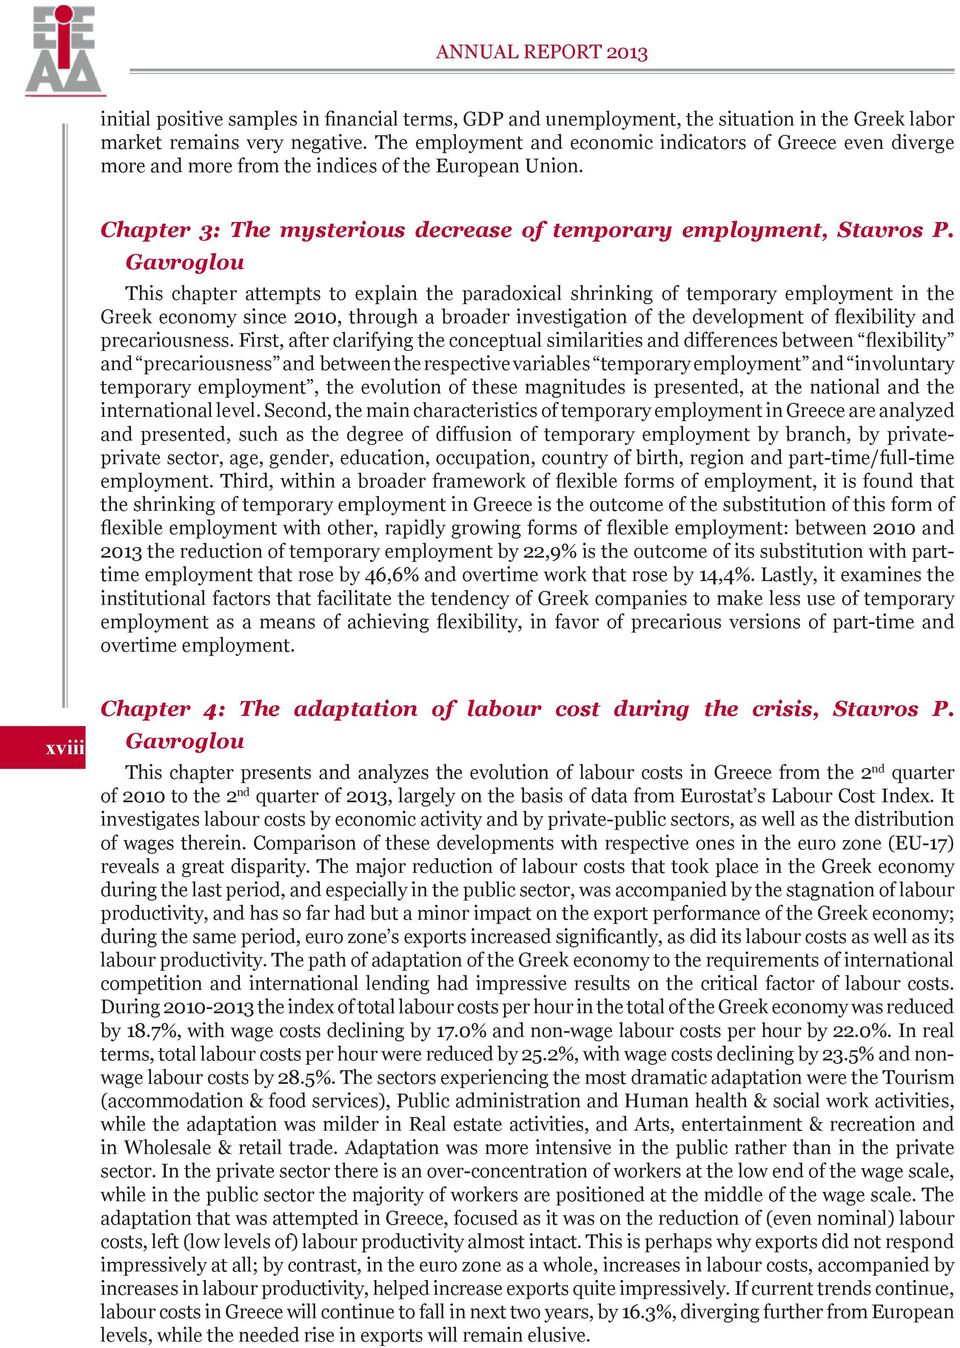 Gavroglou This chapter attempts to explain the paradoxical shrinking of temporary employment in the Greek economy since 2010, through a broader investigation of the development of flexibility and